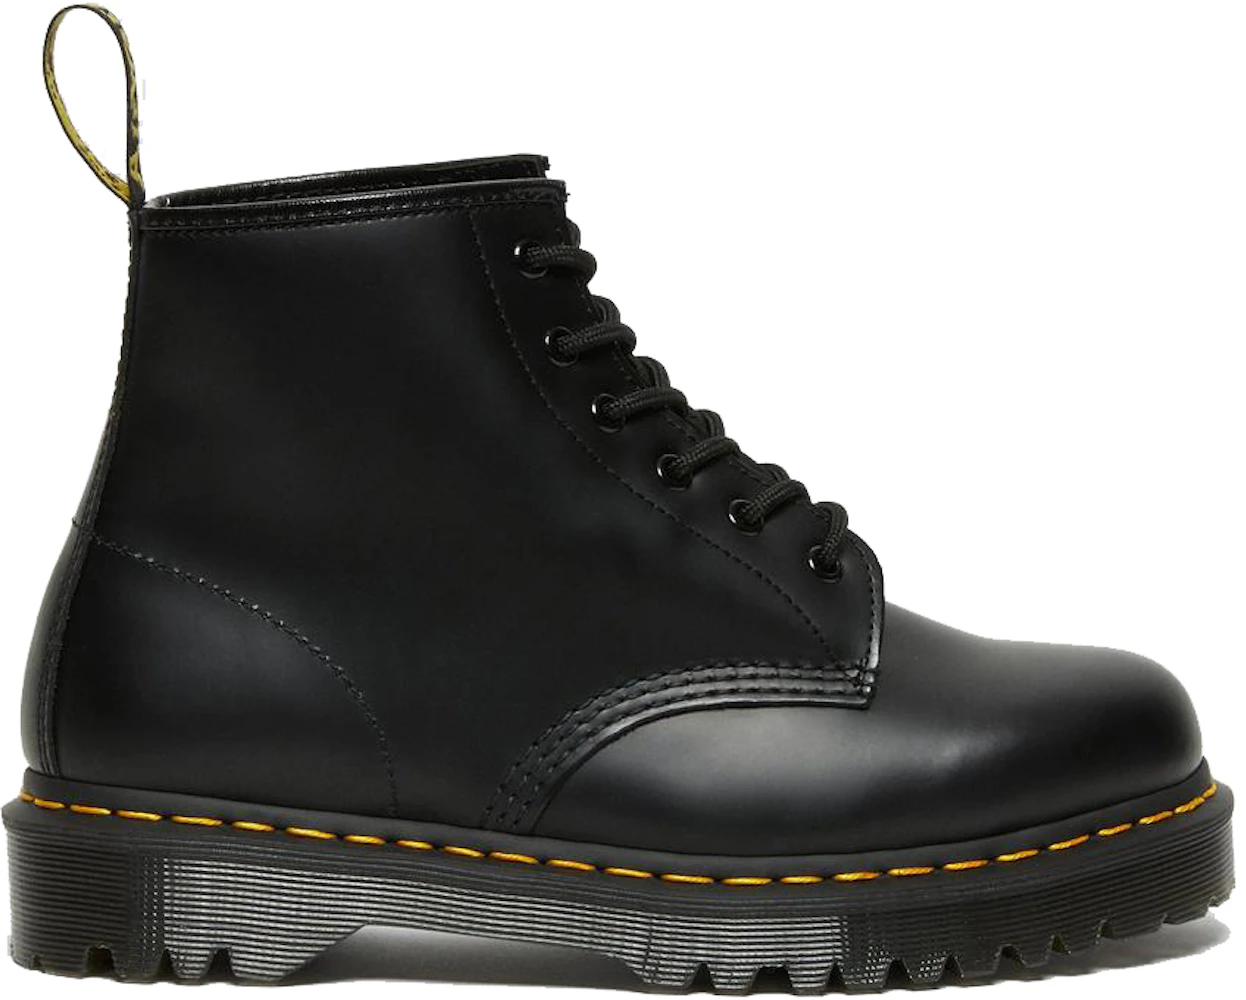 Dr. Martens 101 Bex Smooth Leather Ankle Boots Black Men's - 26203001 - GB